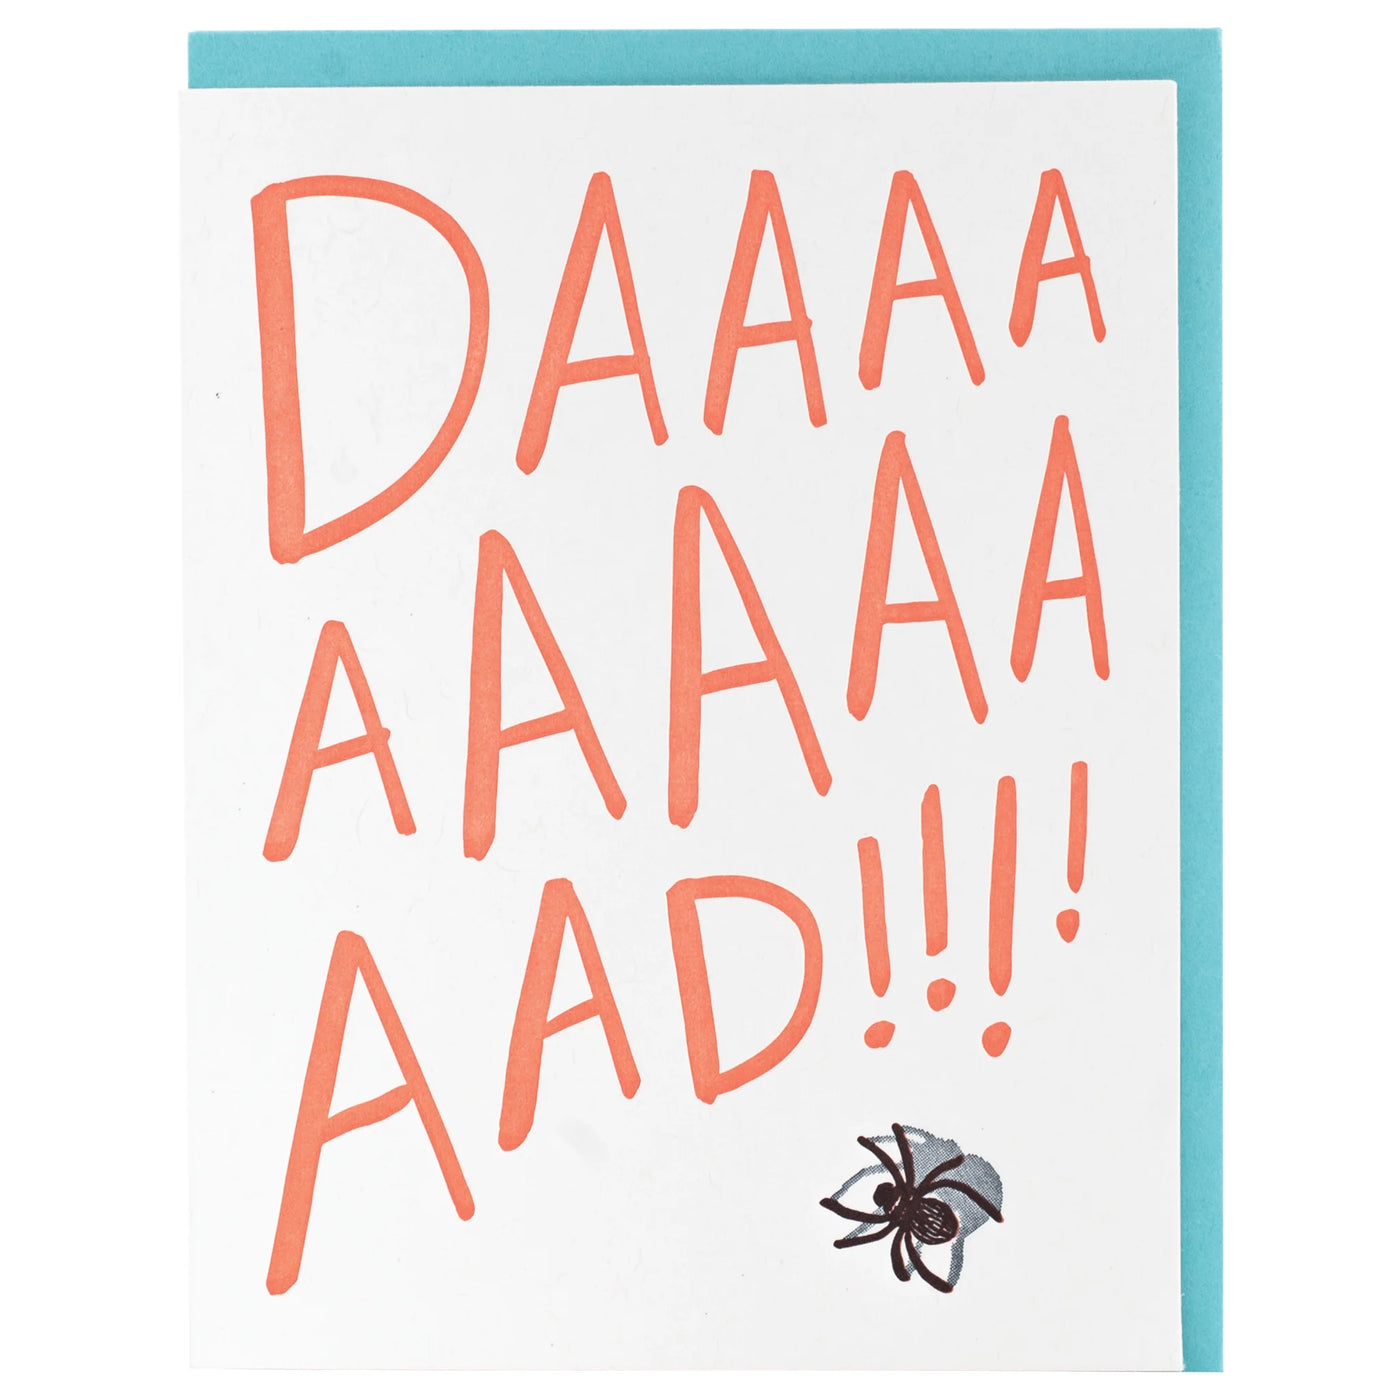 Spider Father's Day Card